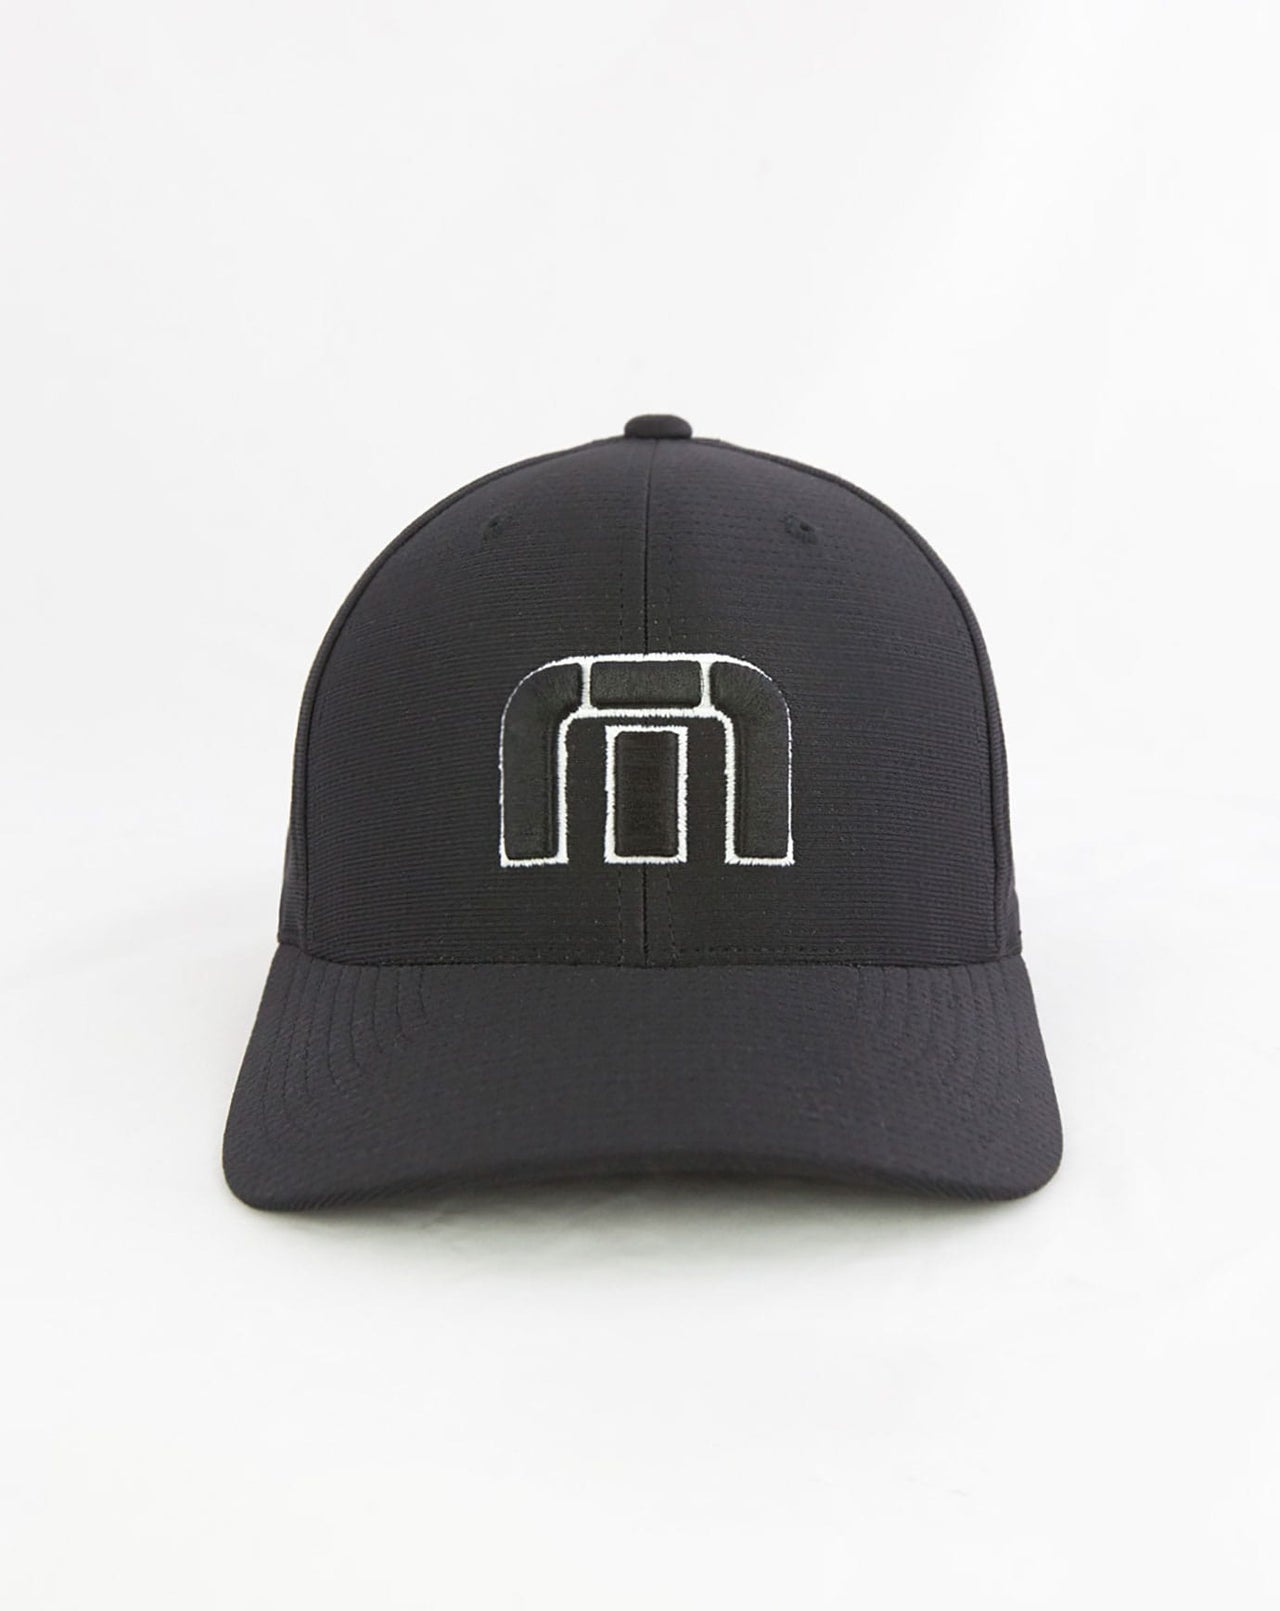 B-Bahamas Fitted Hat Black